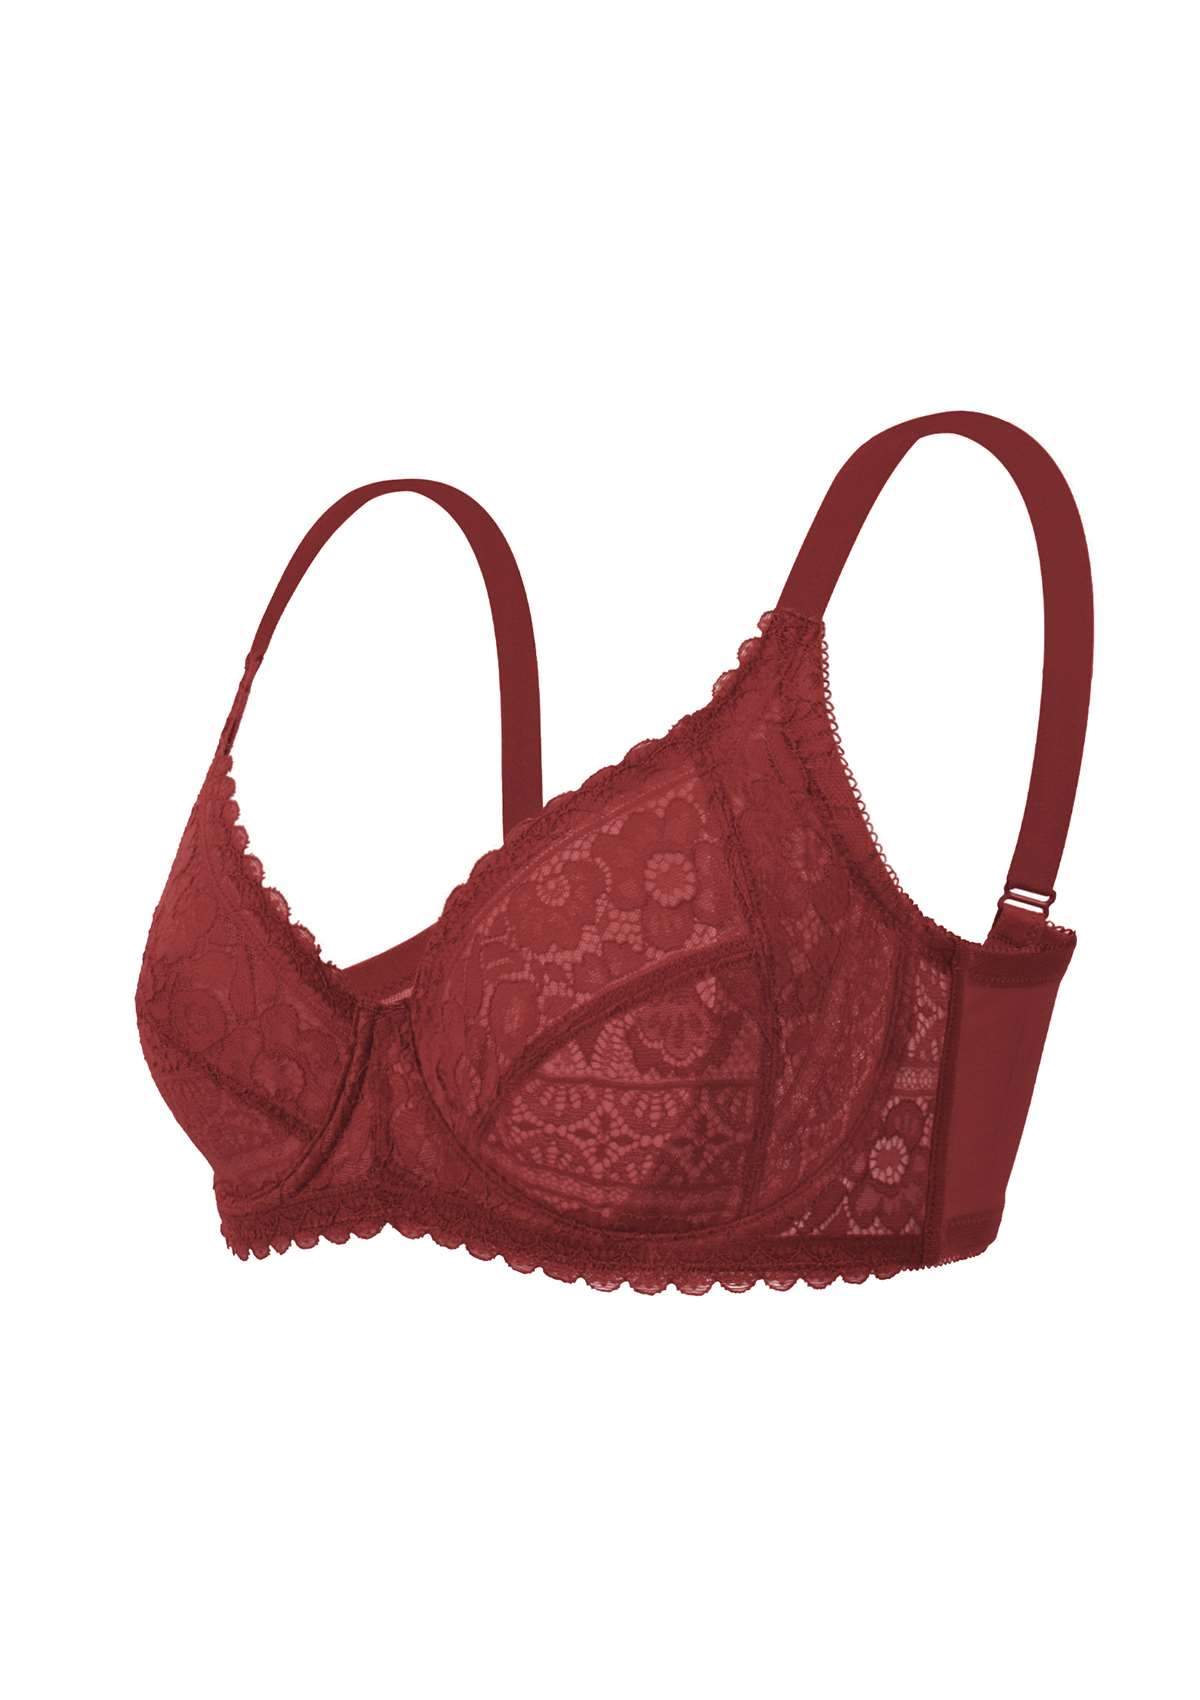 HSIA Freesia Unlined Lace Bra: Bra That Supports Back - Red / 36 / C